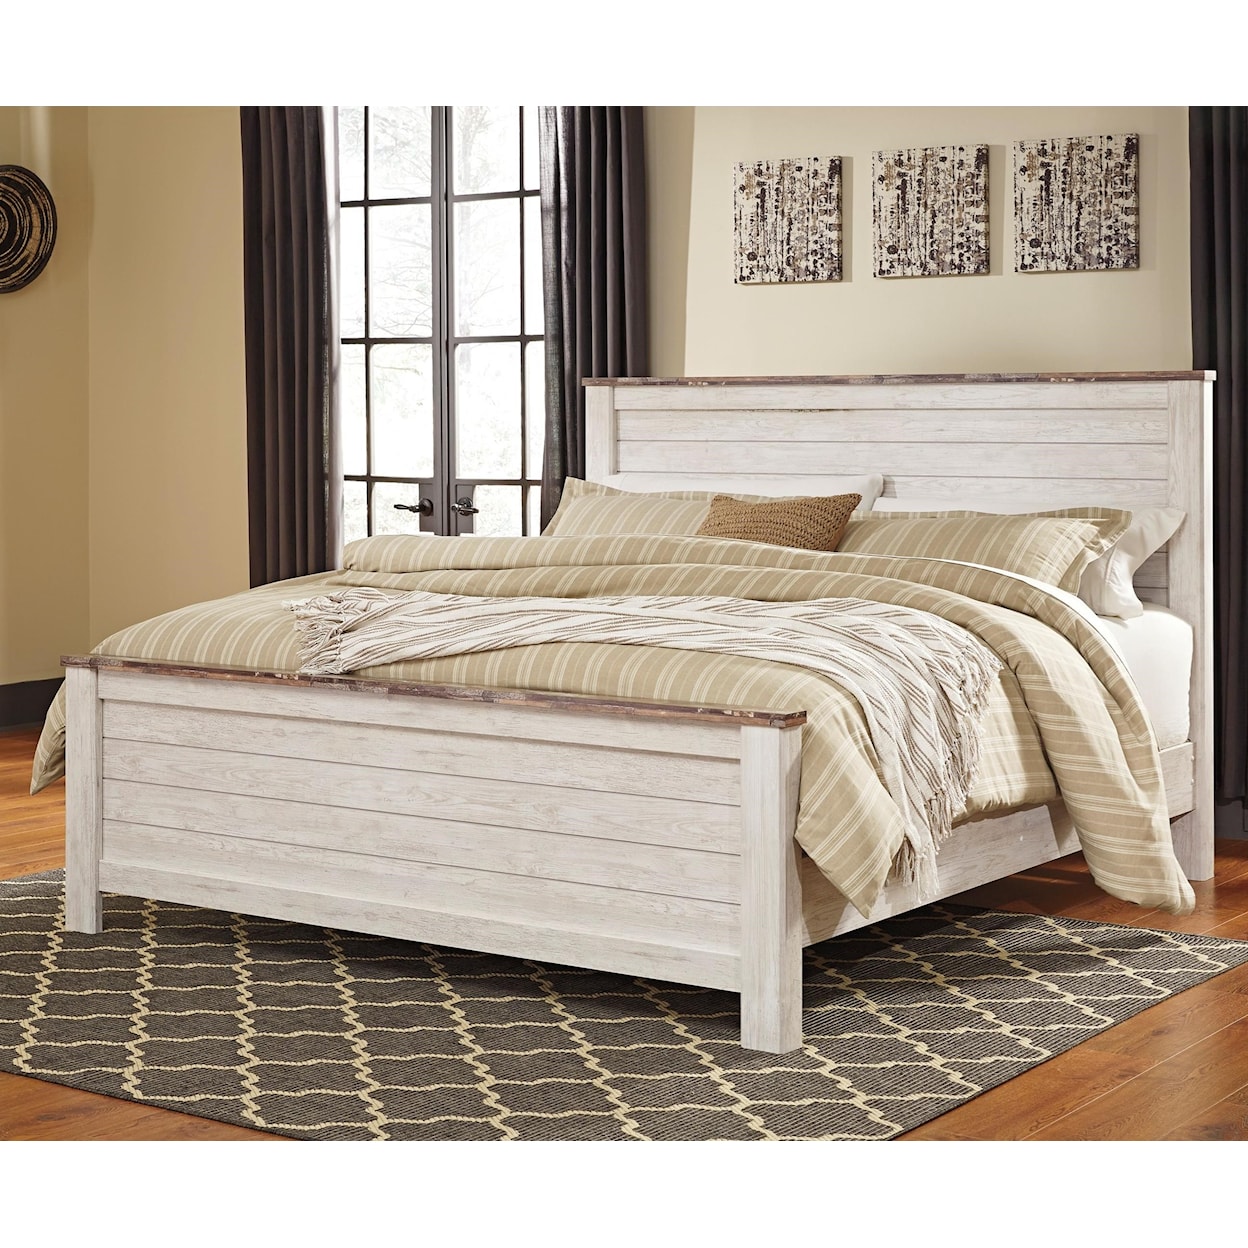 Signature Design by Ashley Willowton California King Panel Bed